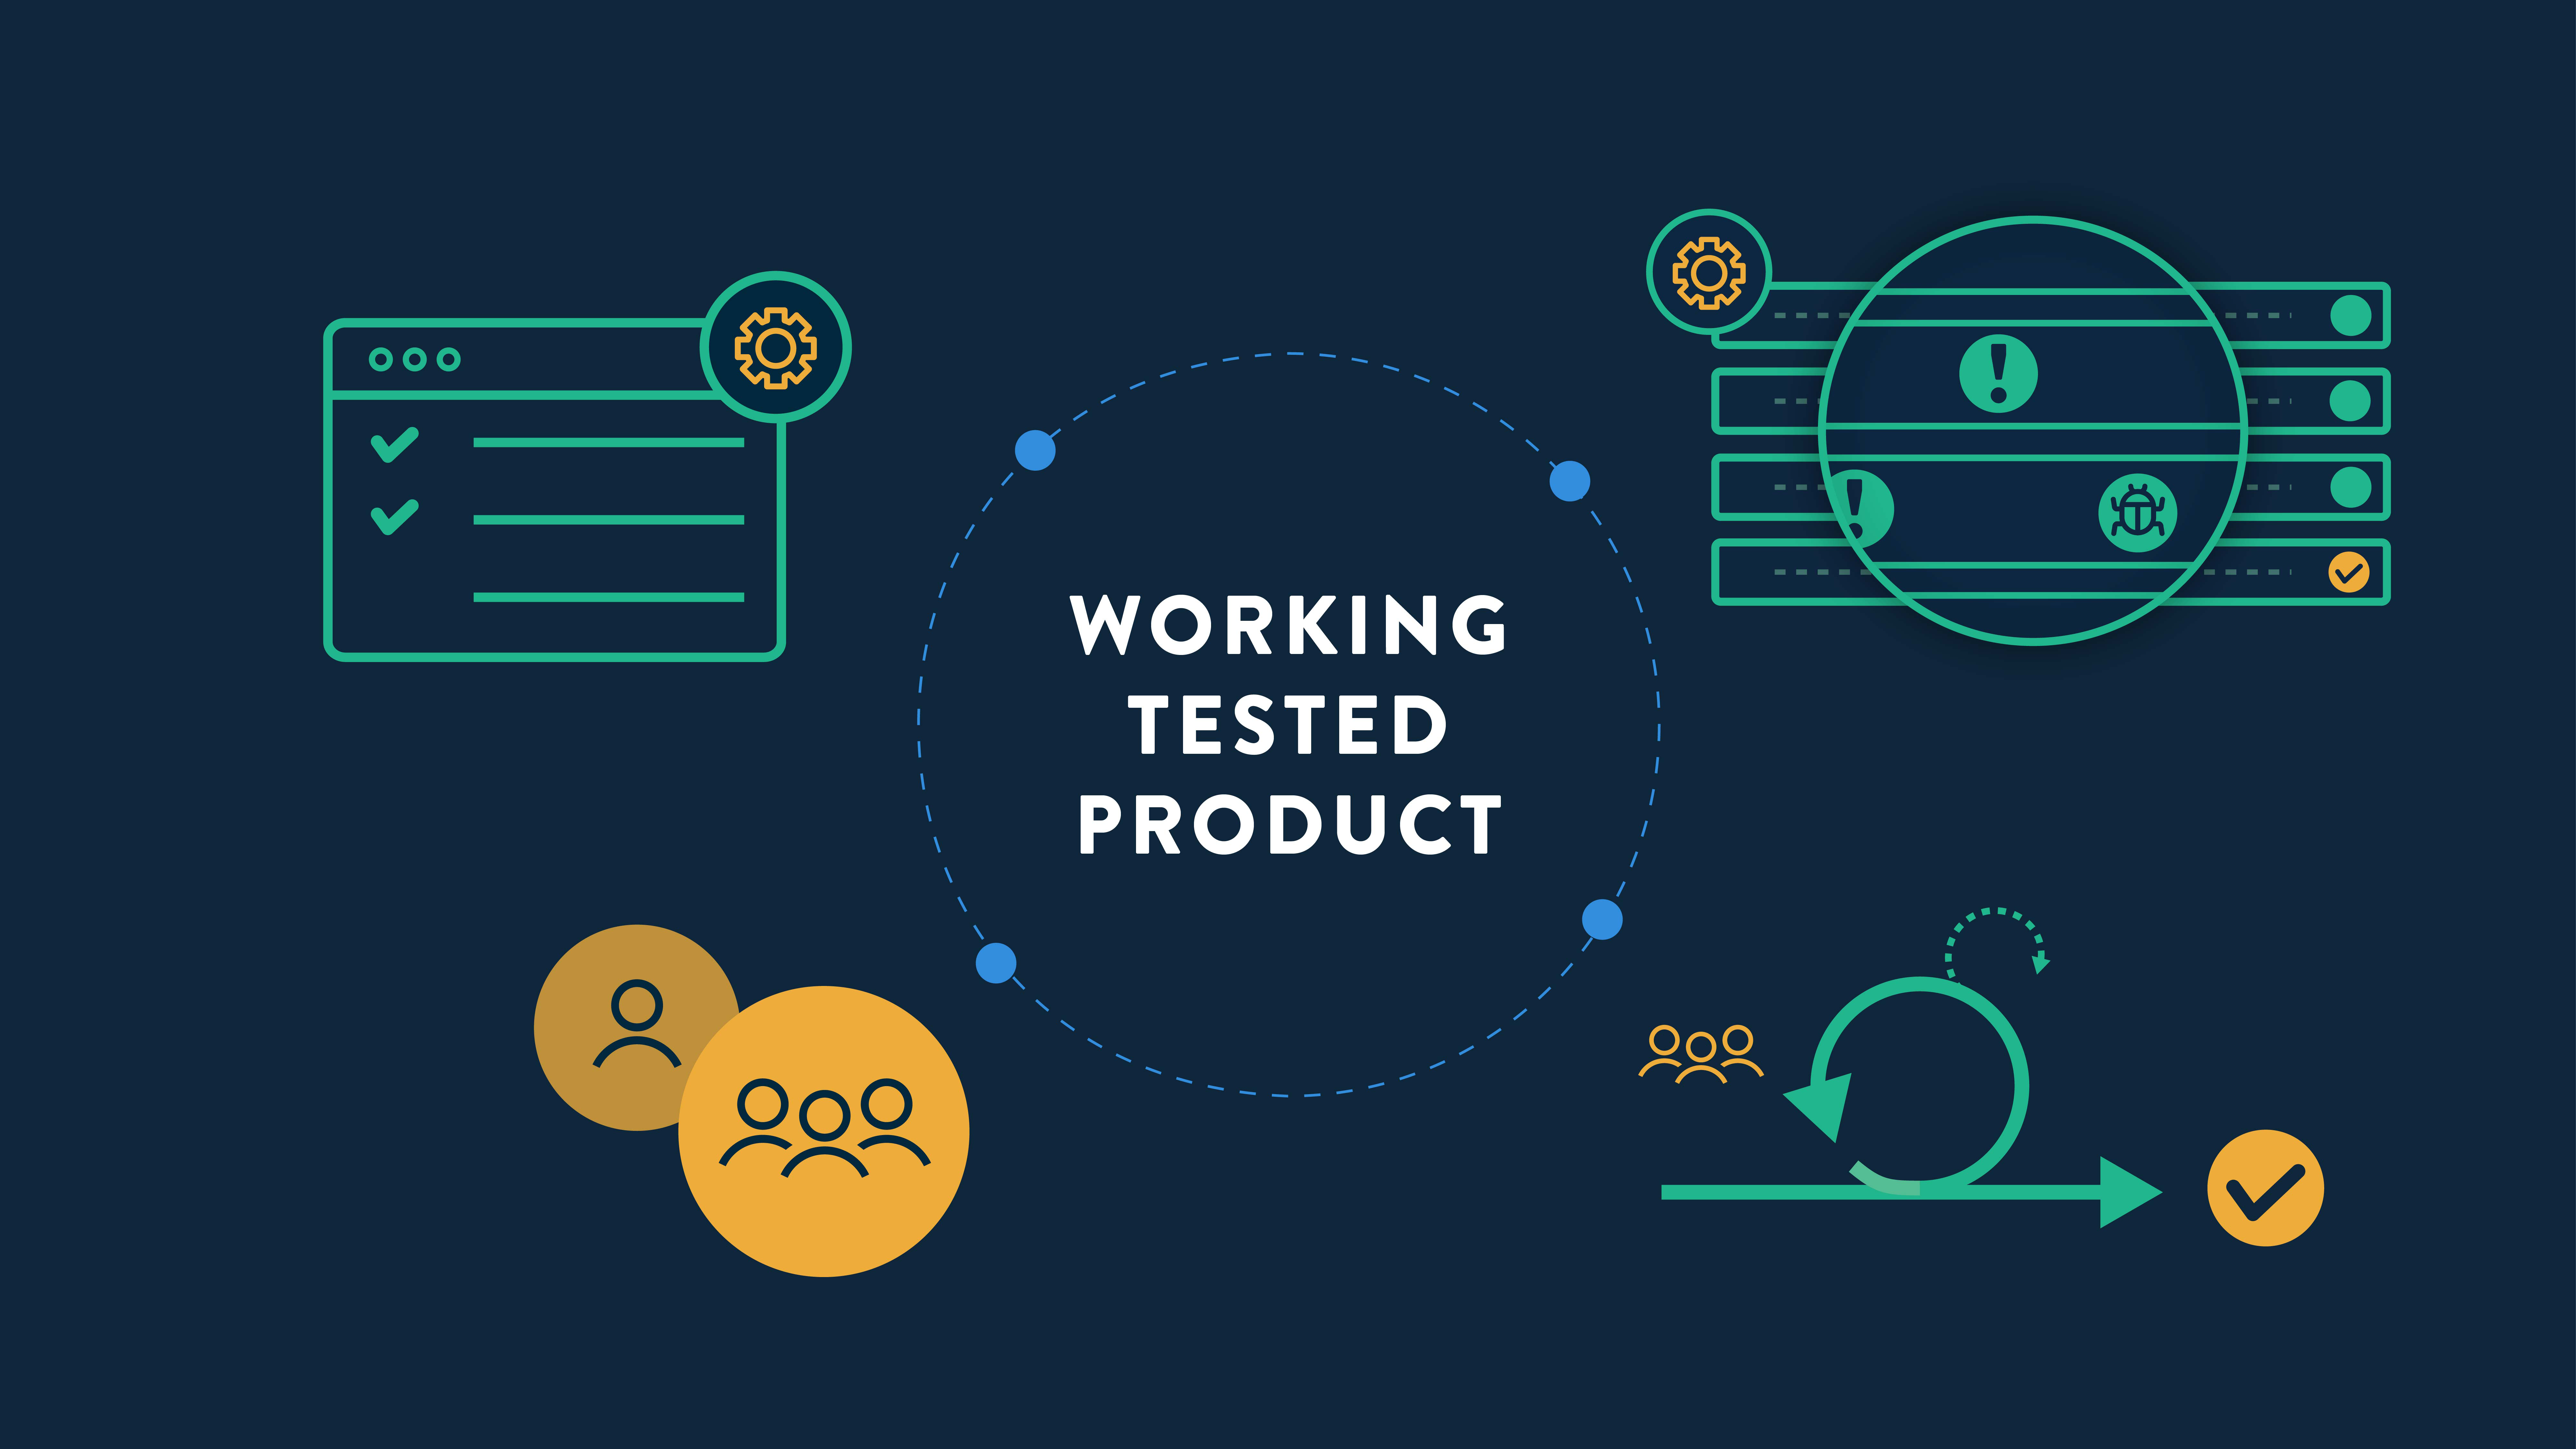 How Working Tested Product Improves Business Outcomes